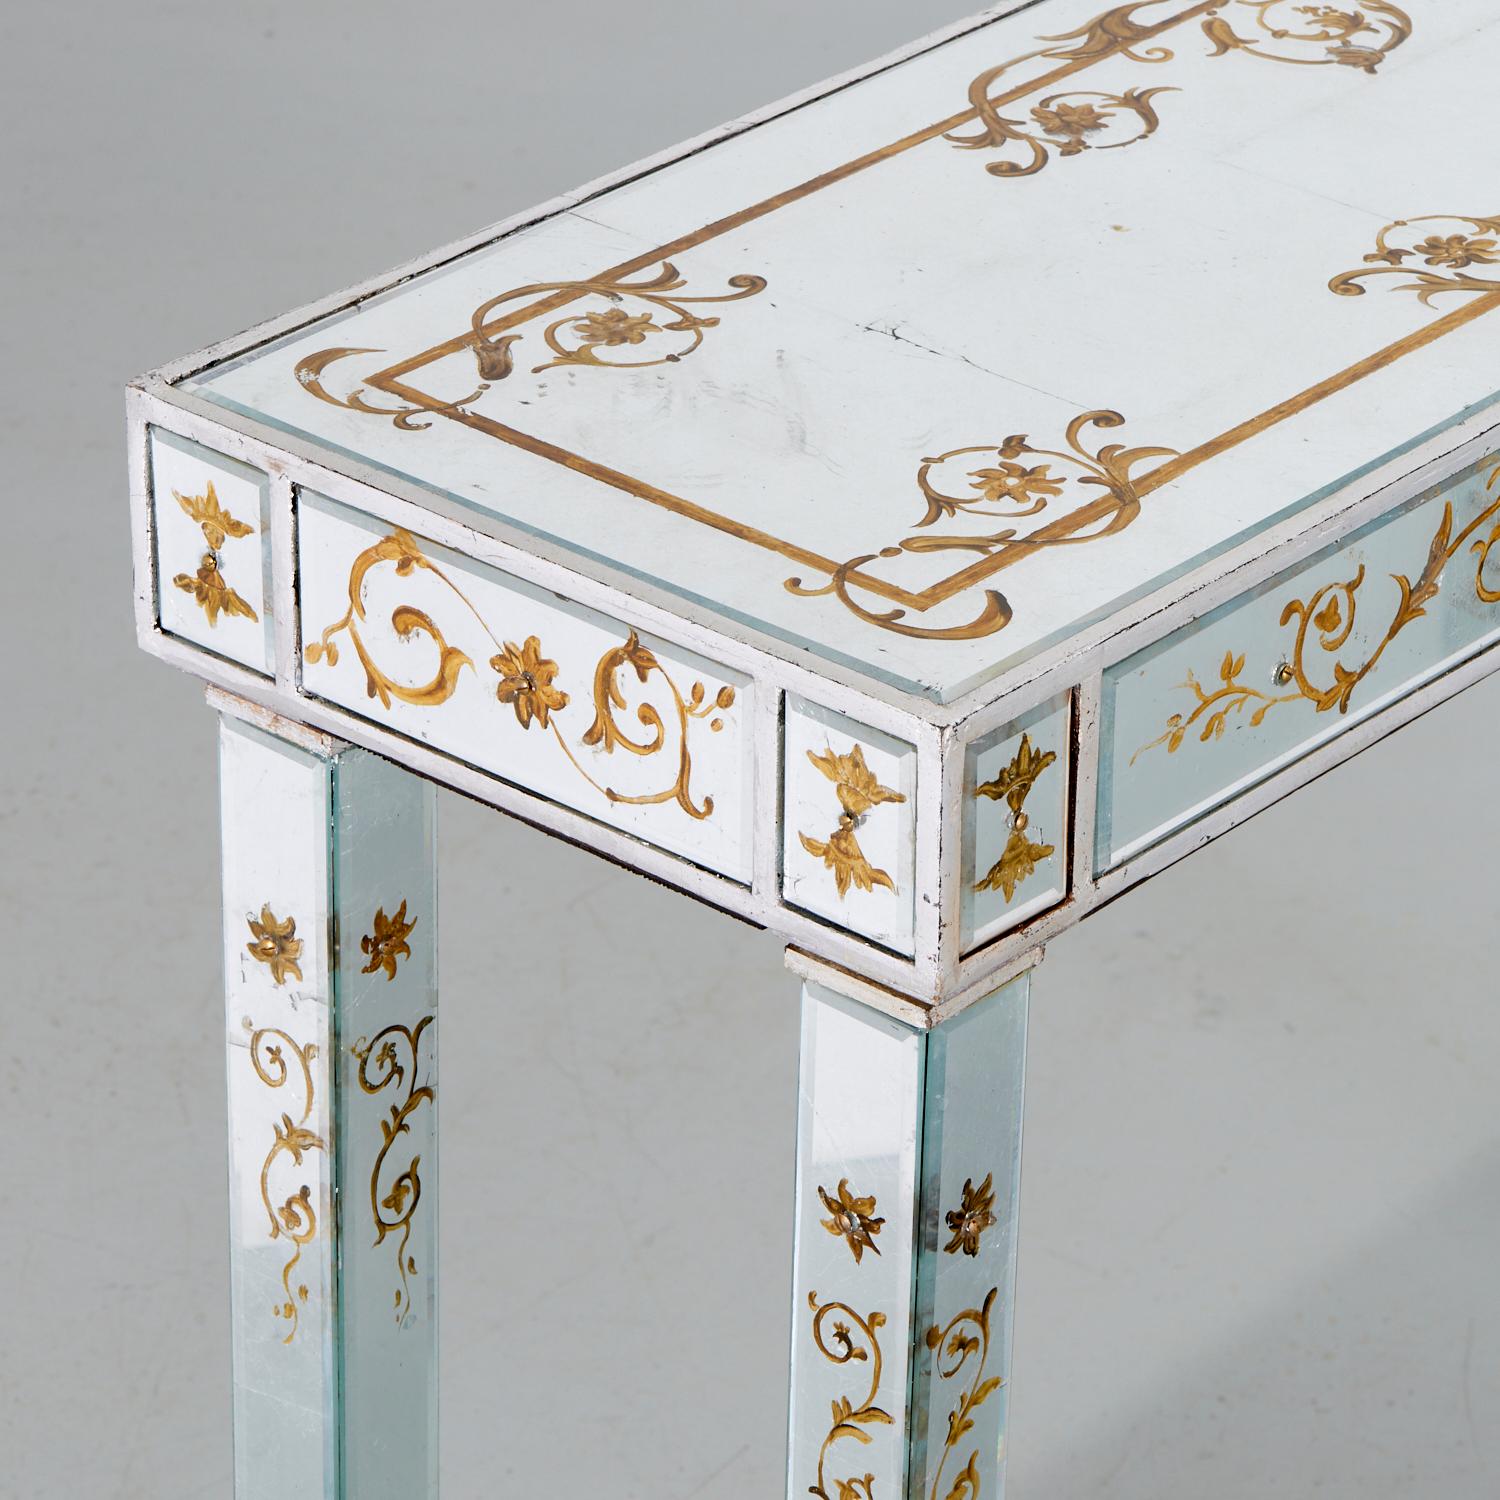 A pair of vintage 20th c., reverse painted mirrored glass console tables decorated with gilt floral scrolls, unmarked, possibly Maison Jansen.

This pair of delightfully dainty tables are beautifully painted. Though certainly showstoppers, there is